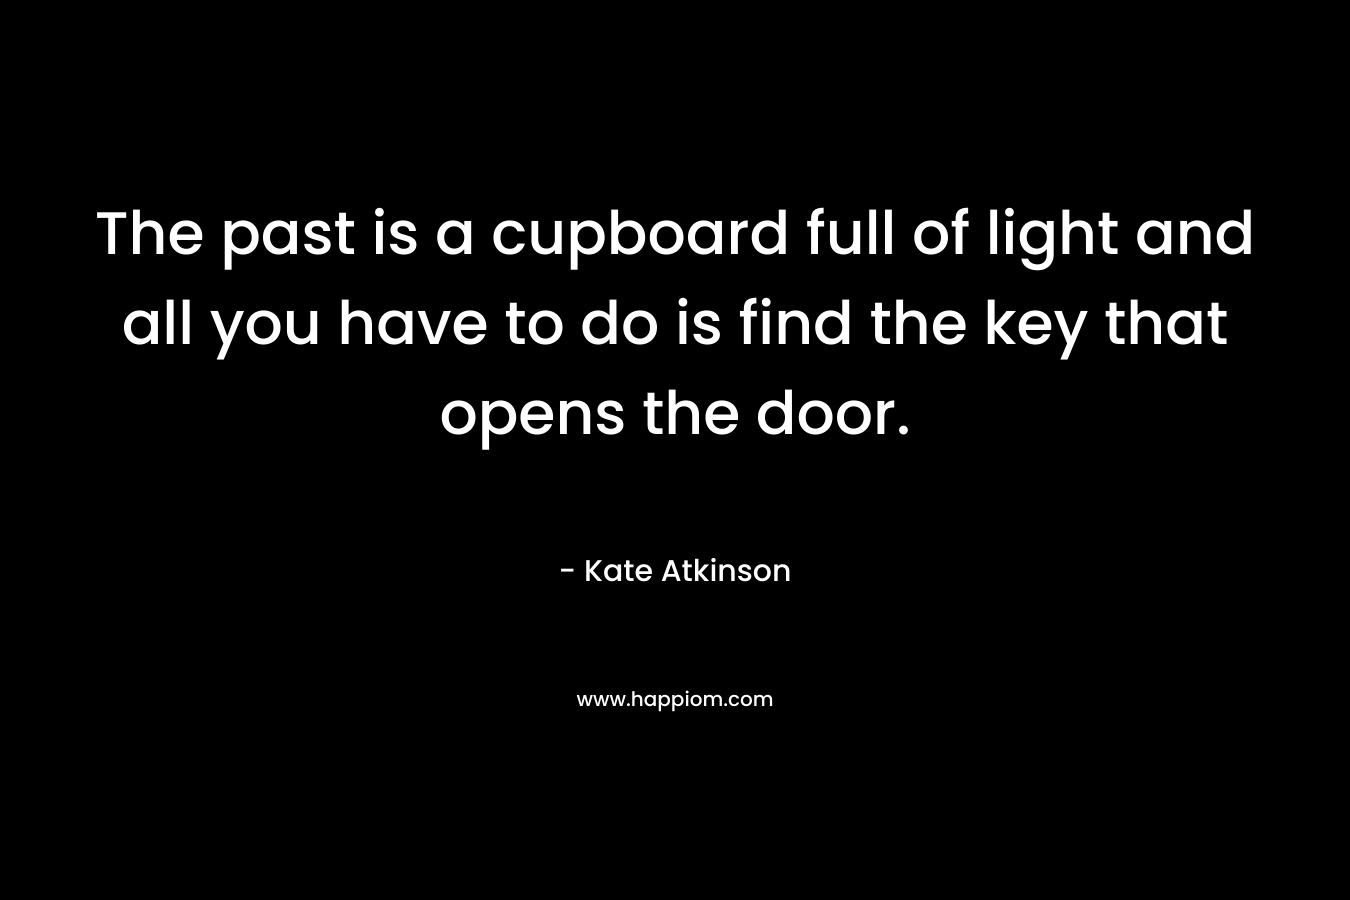 The past is a cupboard full of light and all you have to do is find the key that opens the door. – Kate Atkinson